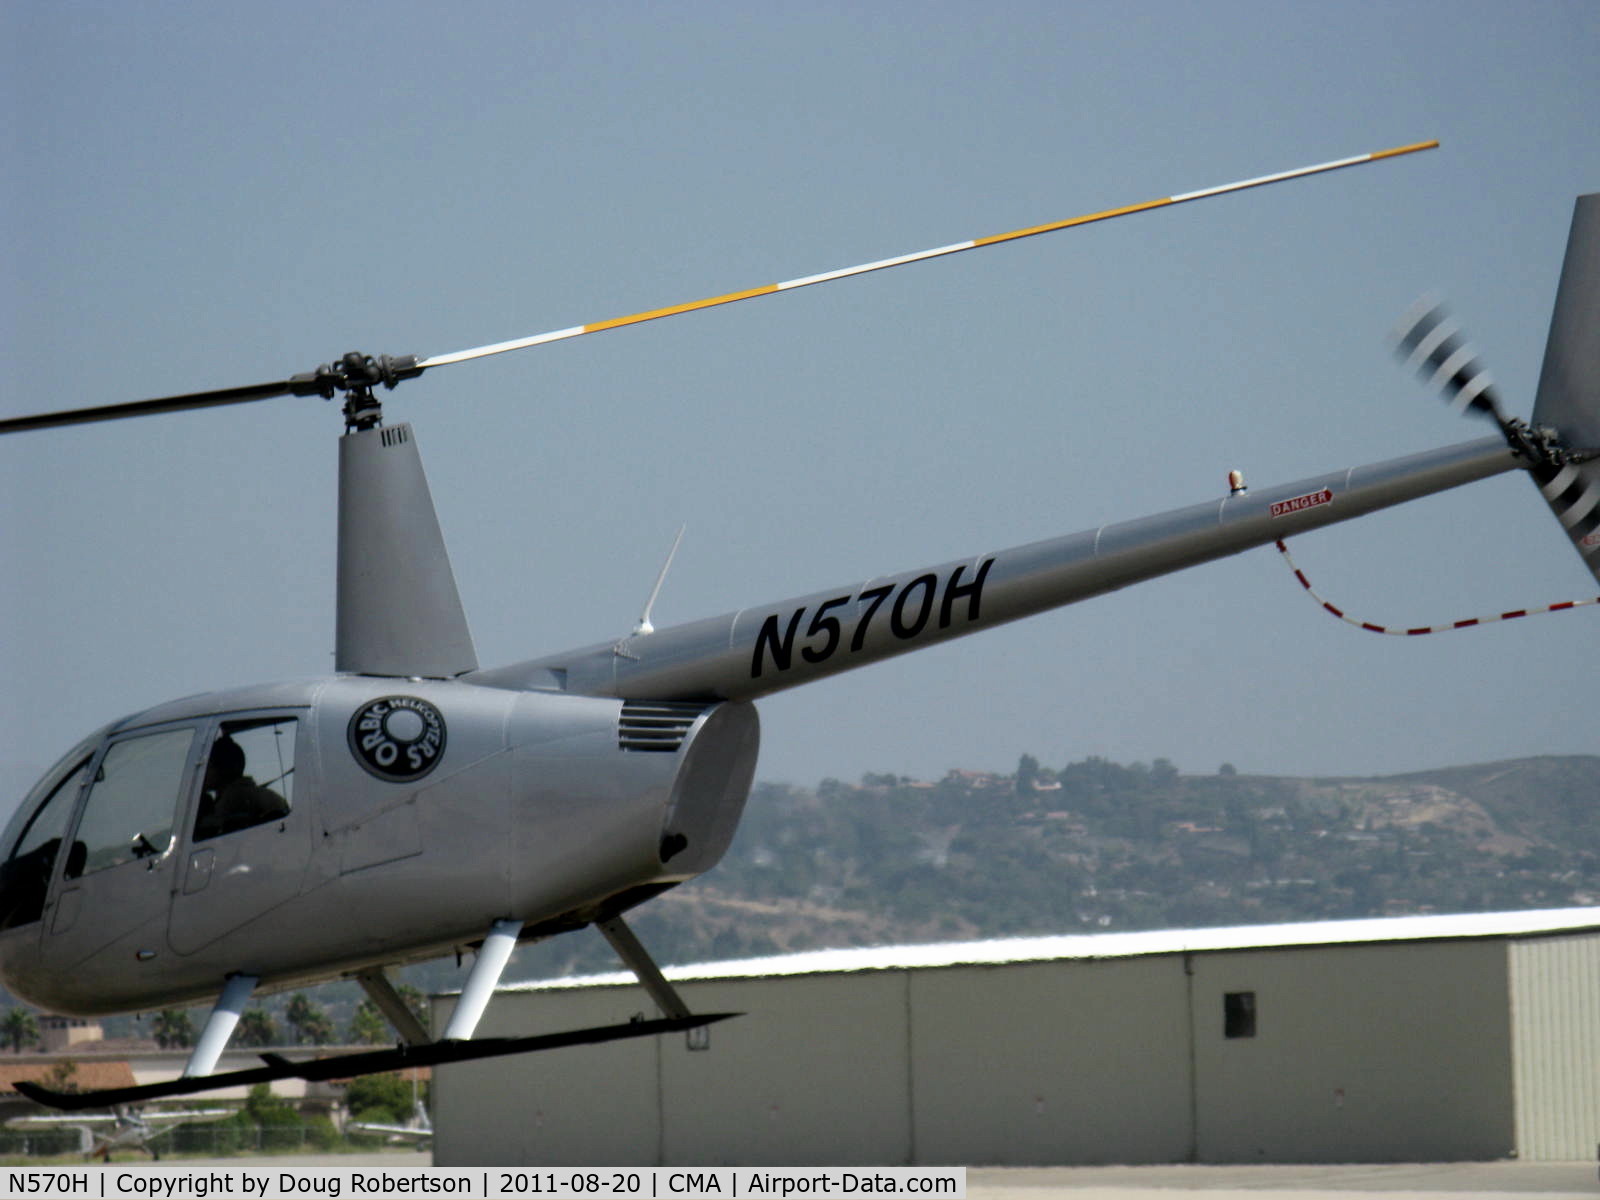 N570H, Robinson R44 C/N 2016, 2009 Robinson R44 RAVEN II, Lycoming IO-540-F1B5 derated to 245 Hp for 5 minutes, 205 Hp continuous, landing. Close enough for you?